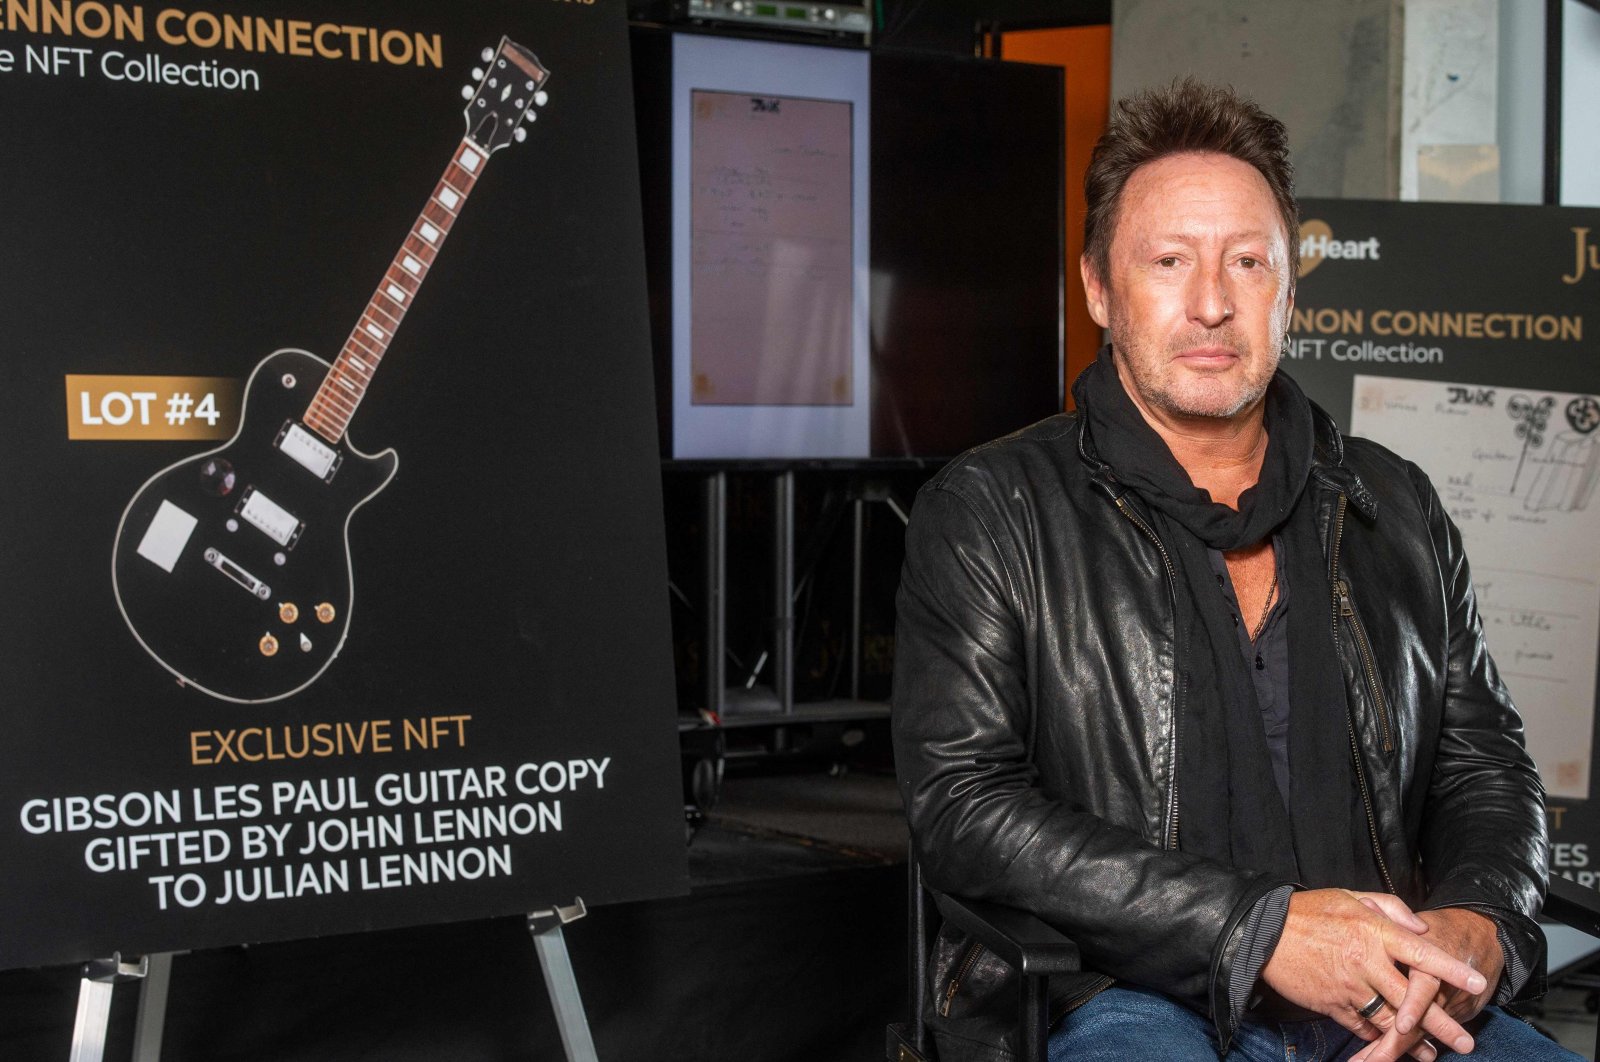 Artist/musician Julian Lennon poses in front of the NFT part of the &quot;Lennon Connection: The NFT Collection&quot; auction featuring cherished Beatles and John Lennon memorabilia from his private collection, at Julien&#039;s Auctions, in Beverly Hills, California, Jan. 25, 2022. (AFP Photo)